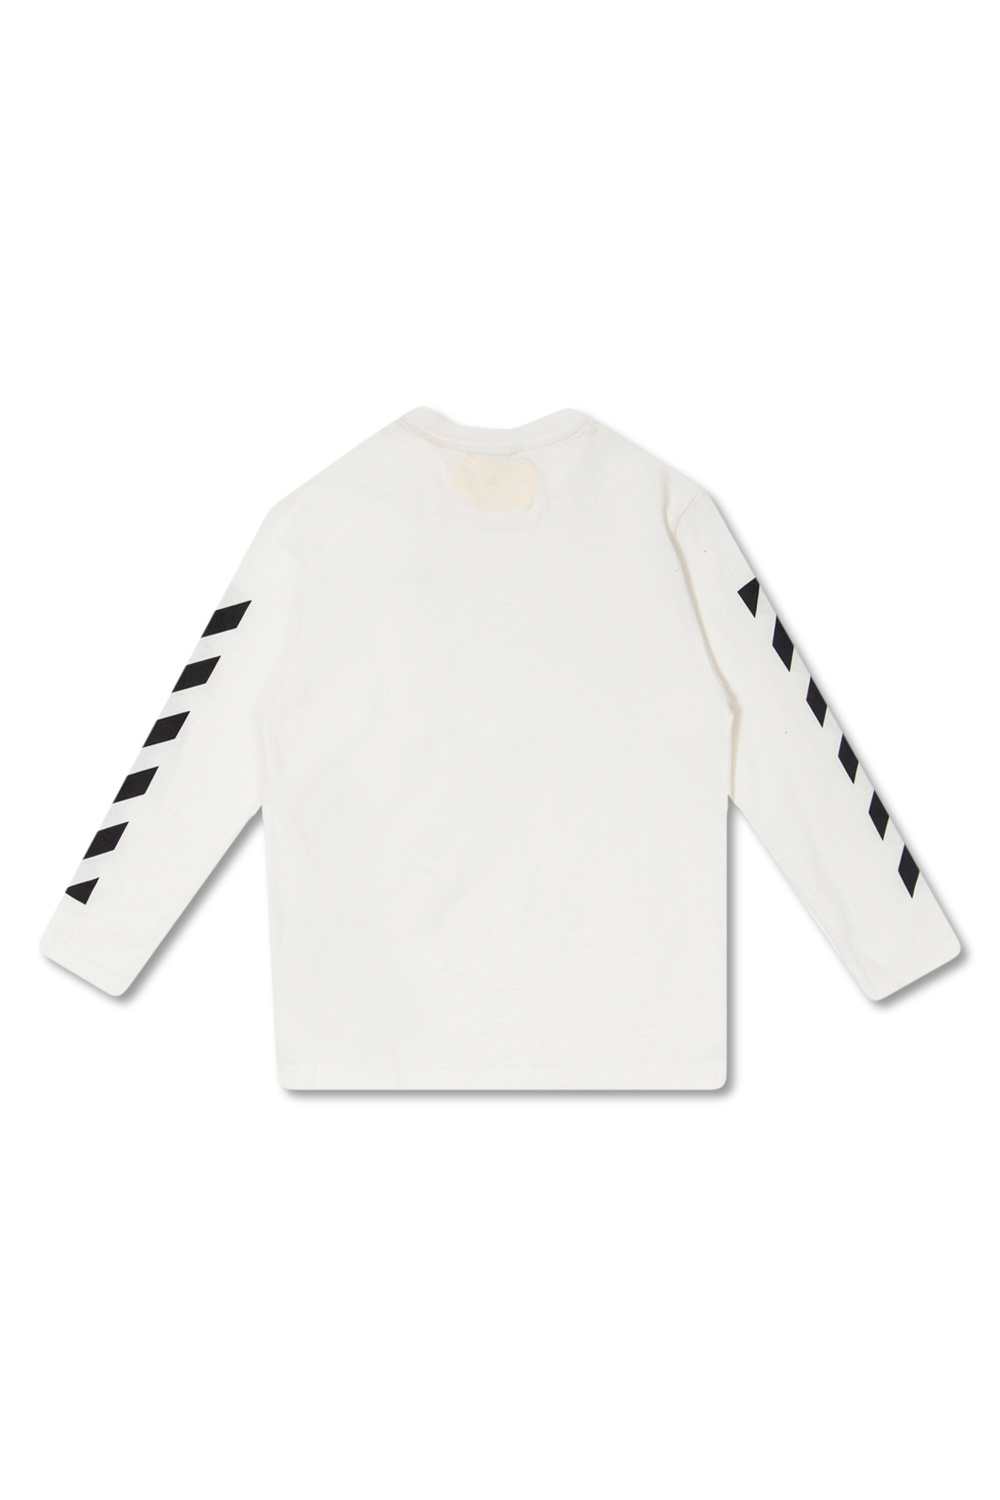 Off-White Kids T-shirt Hooded with long sleeves